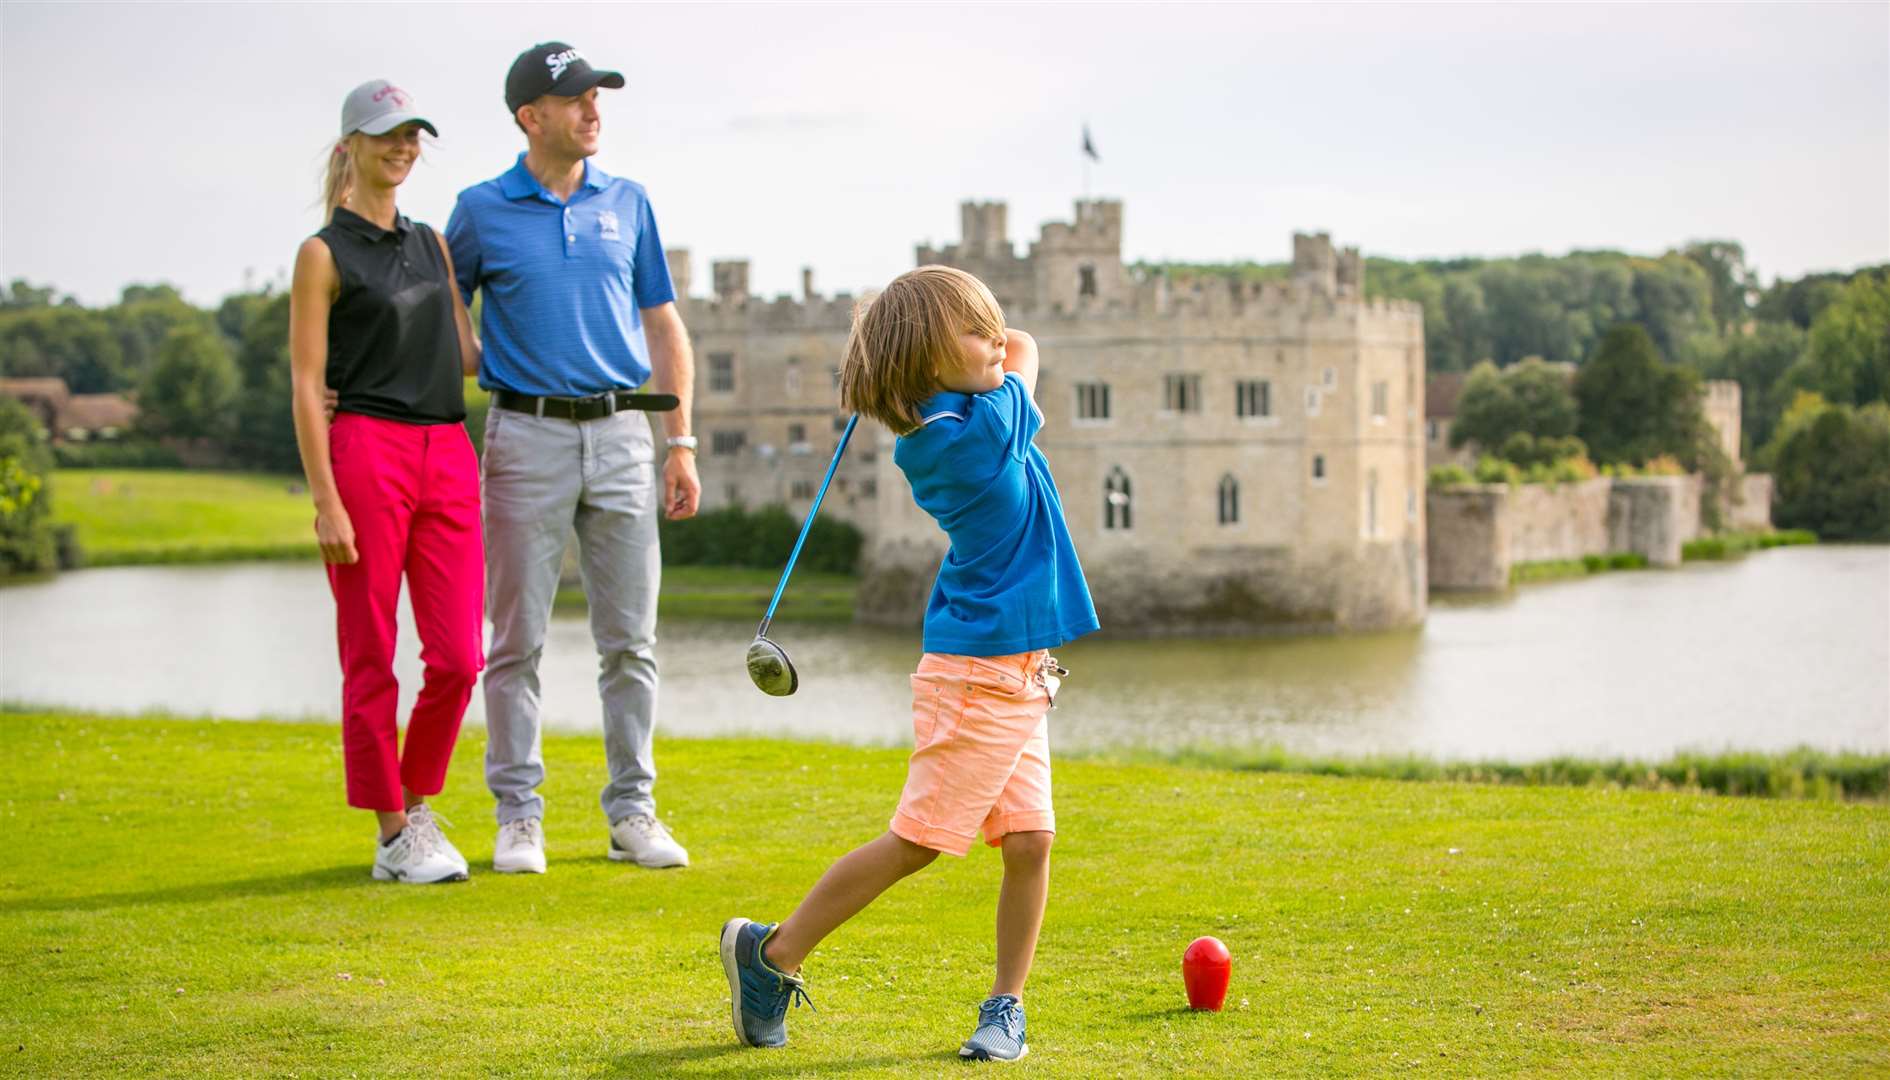 Leeds Castle Golf Club offers pay and play golf, great value memberships and expert coaching for all ages and skill levels. (www.matthewwalkerphotography.com)